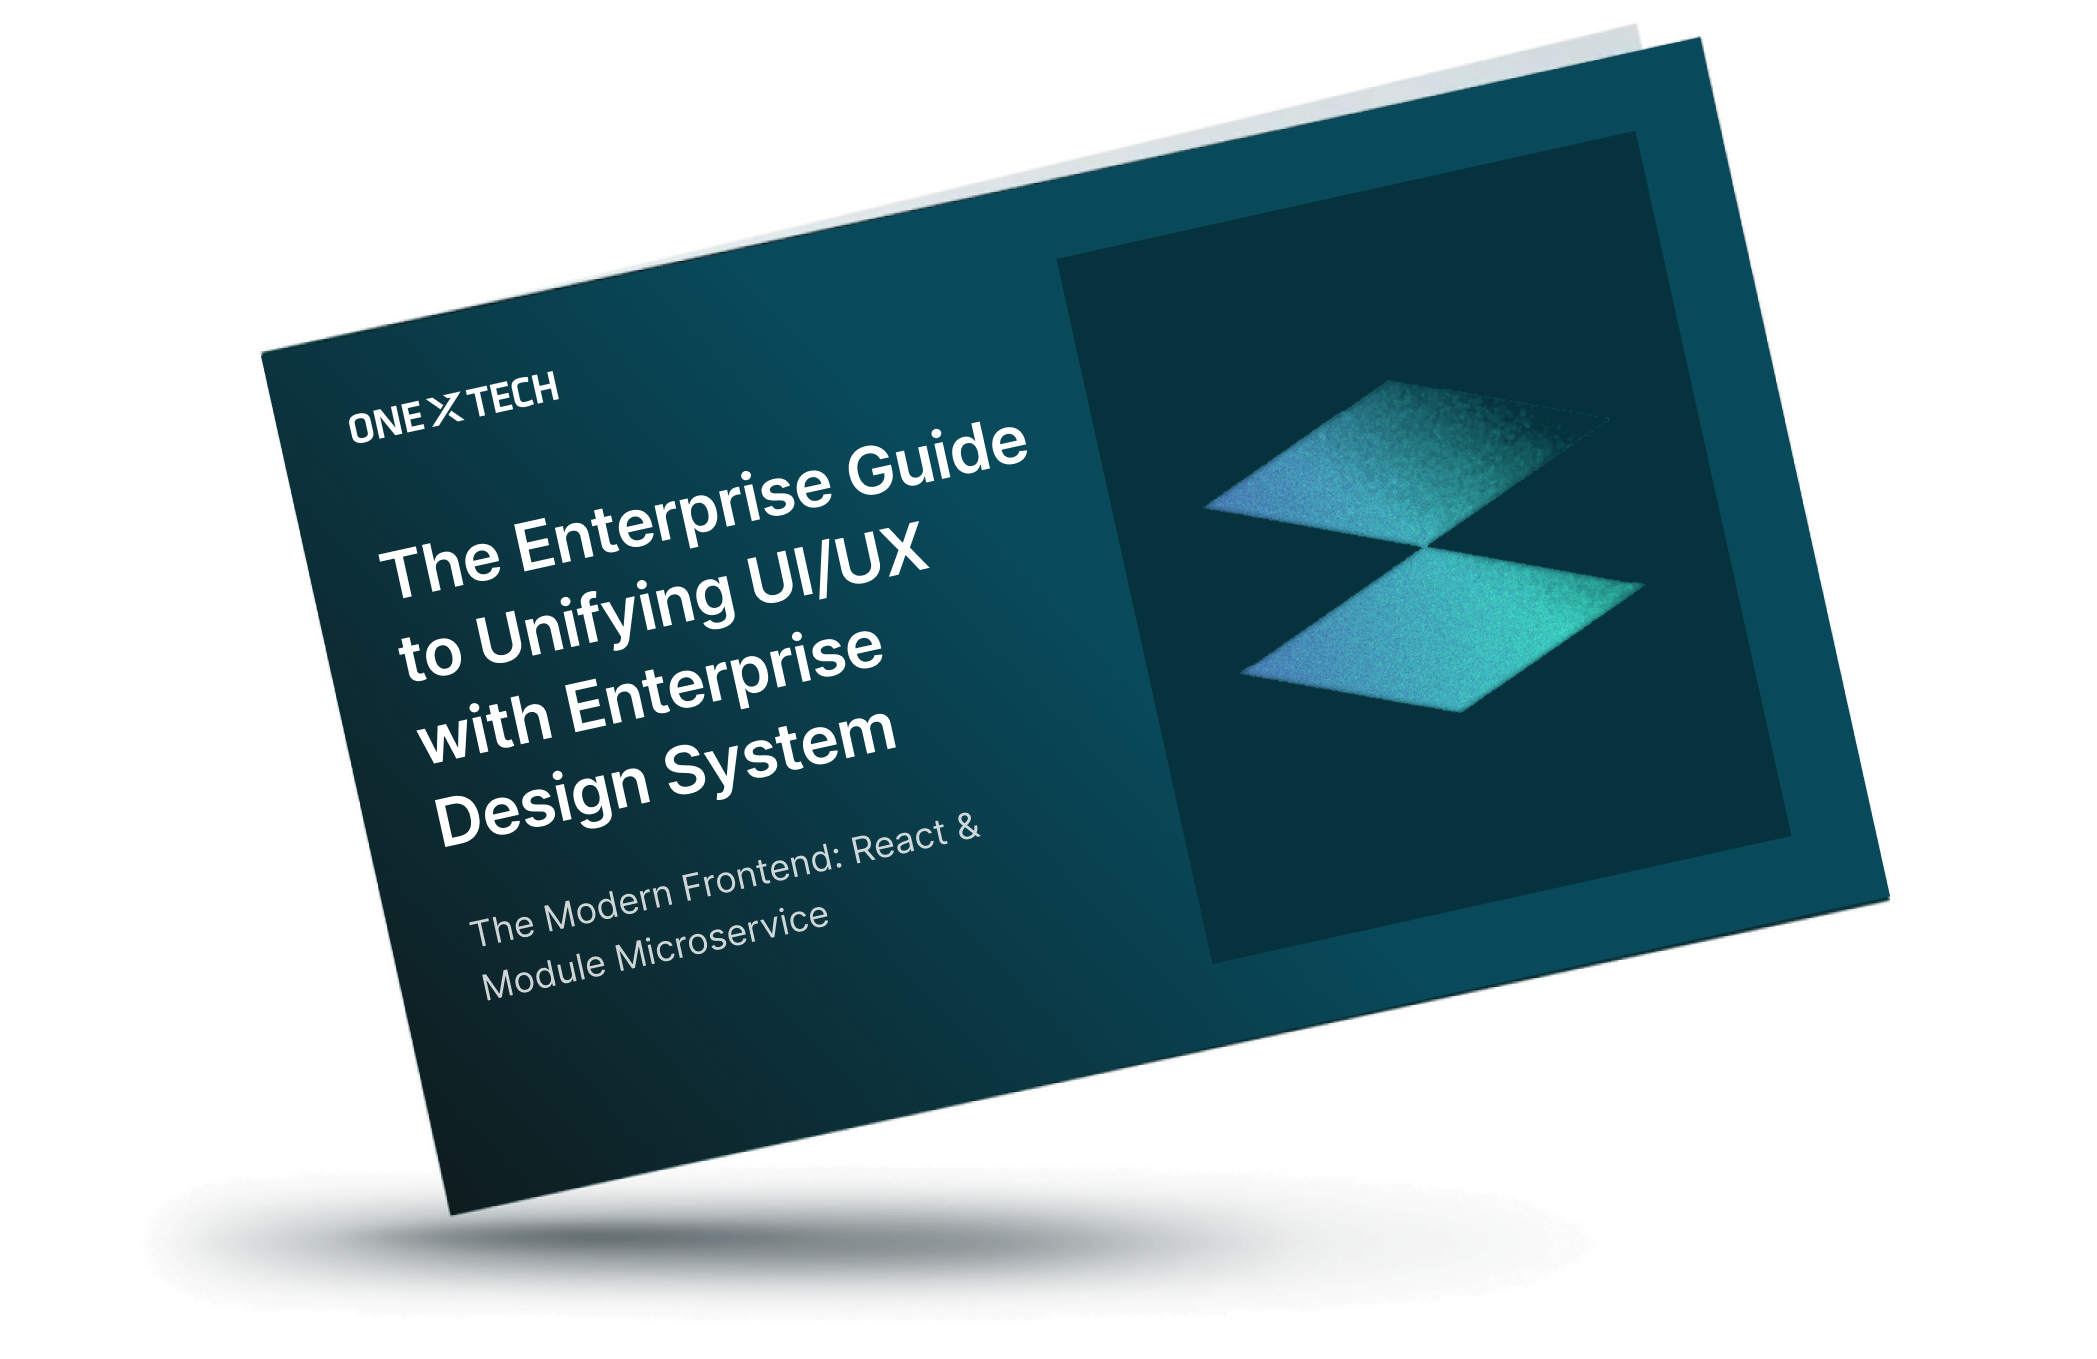 The Enterprise Guide to Unifying UI/UX with Enterprise Design Systems